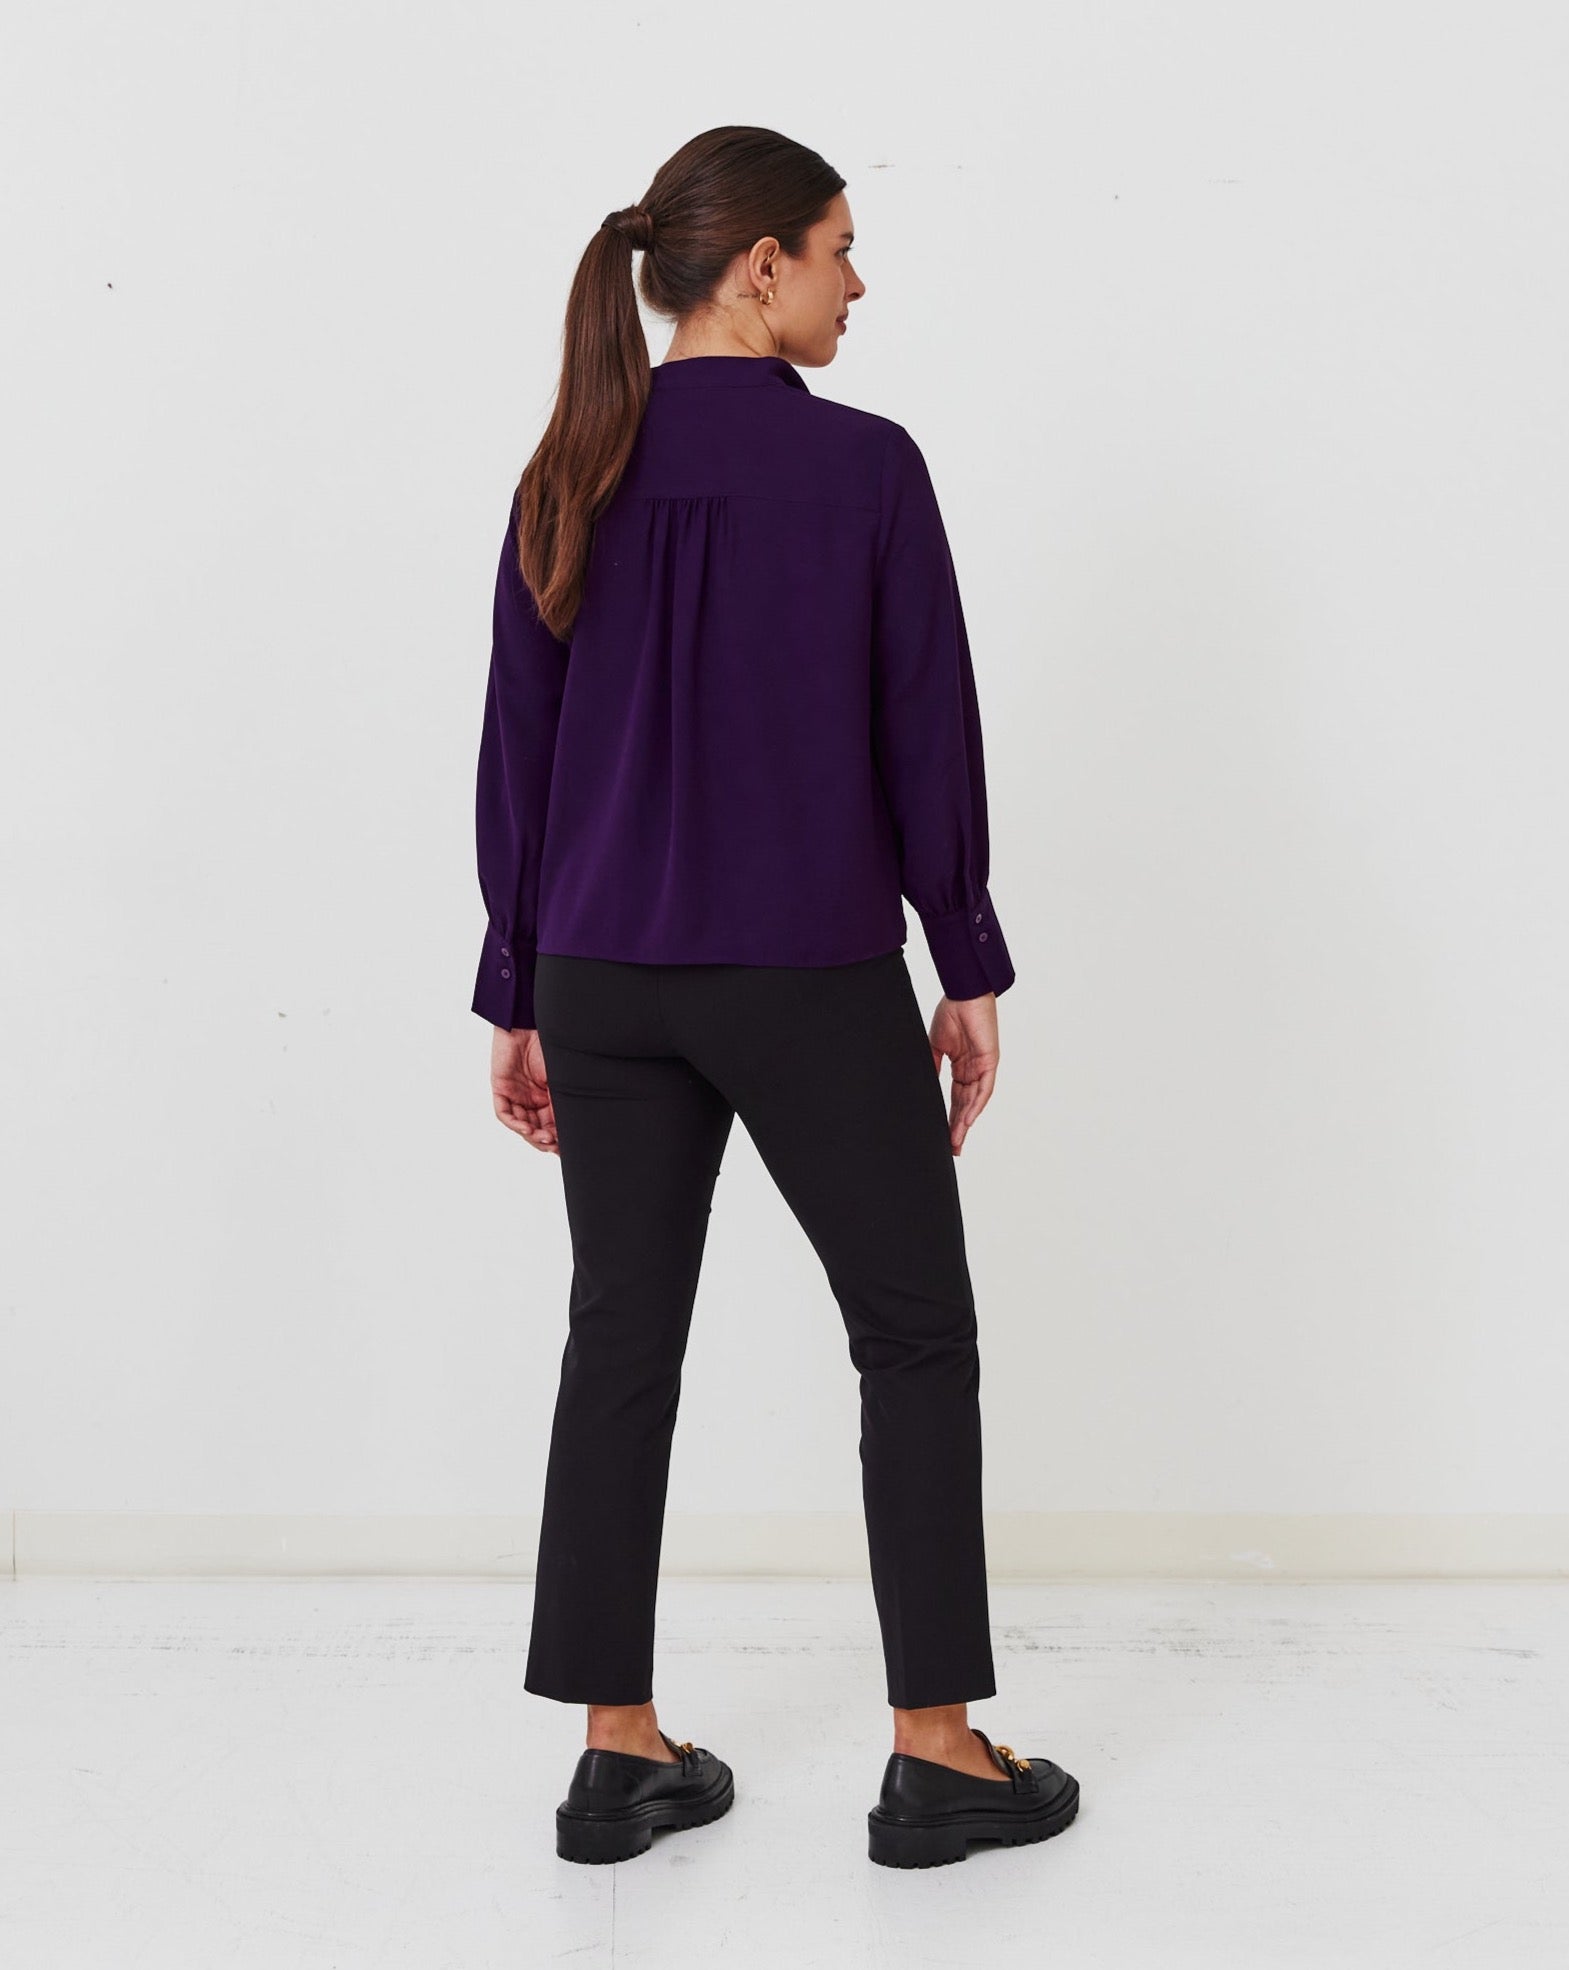 The Ace Blouse in Eminence